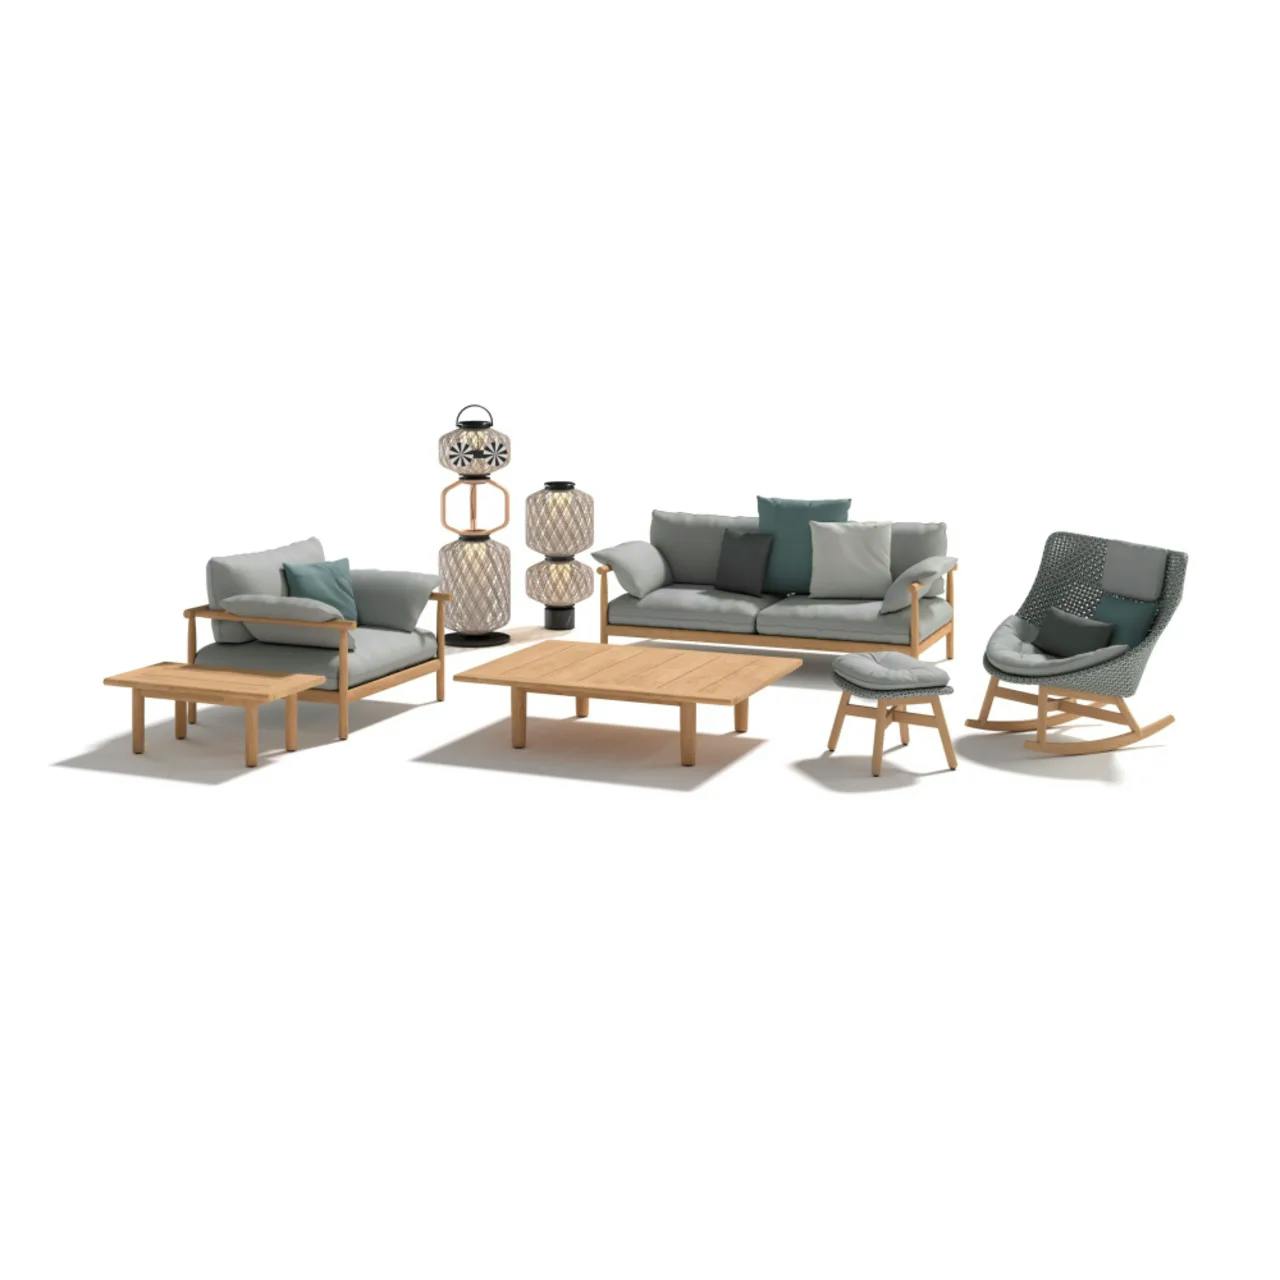 DEDON TIBBO 2-Seater, Lounge Chair, & Coffee Tables | THE OTHERS Lanterns | MBRACE Rocking Chair & Footstool